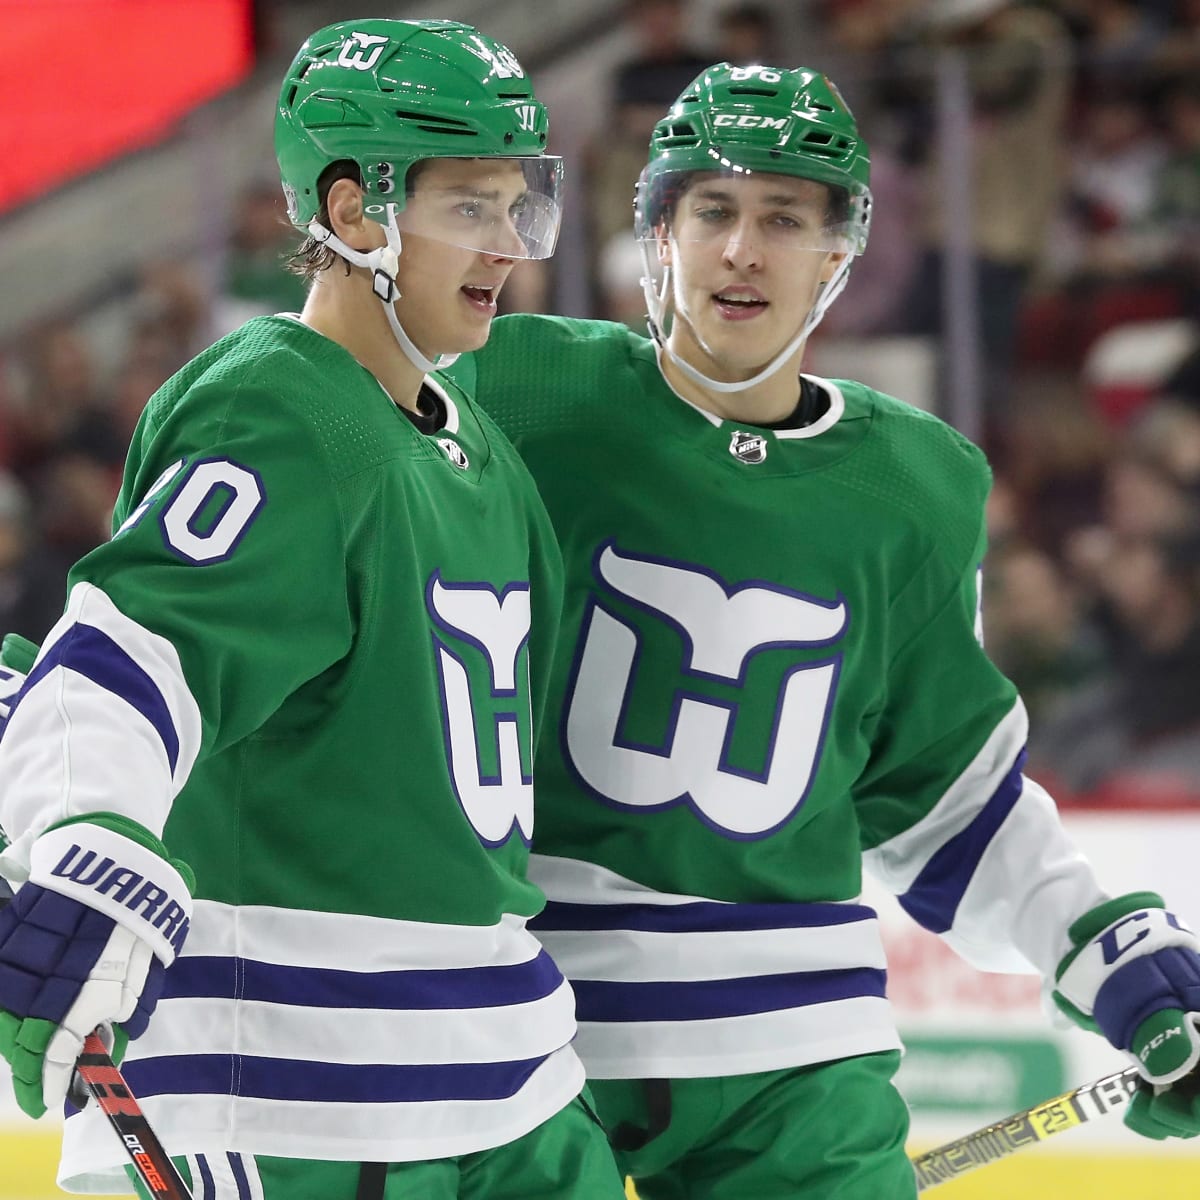 Hurricanes breaking out Whalers uniforms tonight in Boston, and